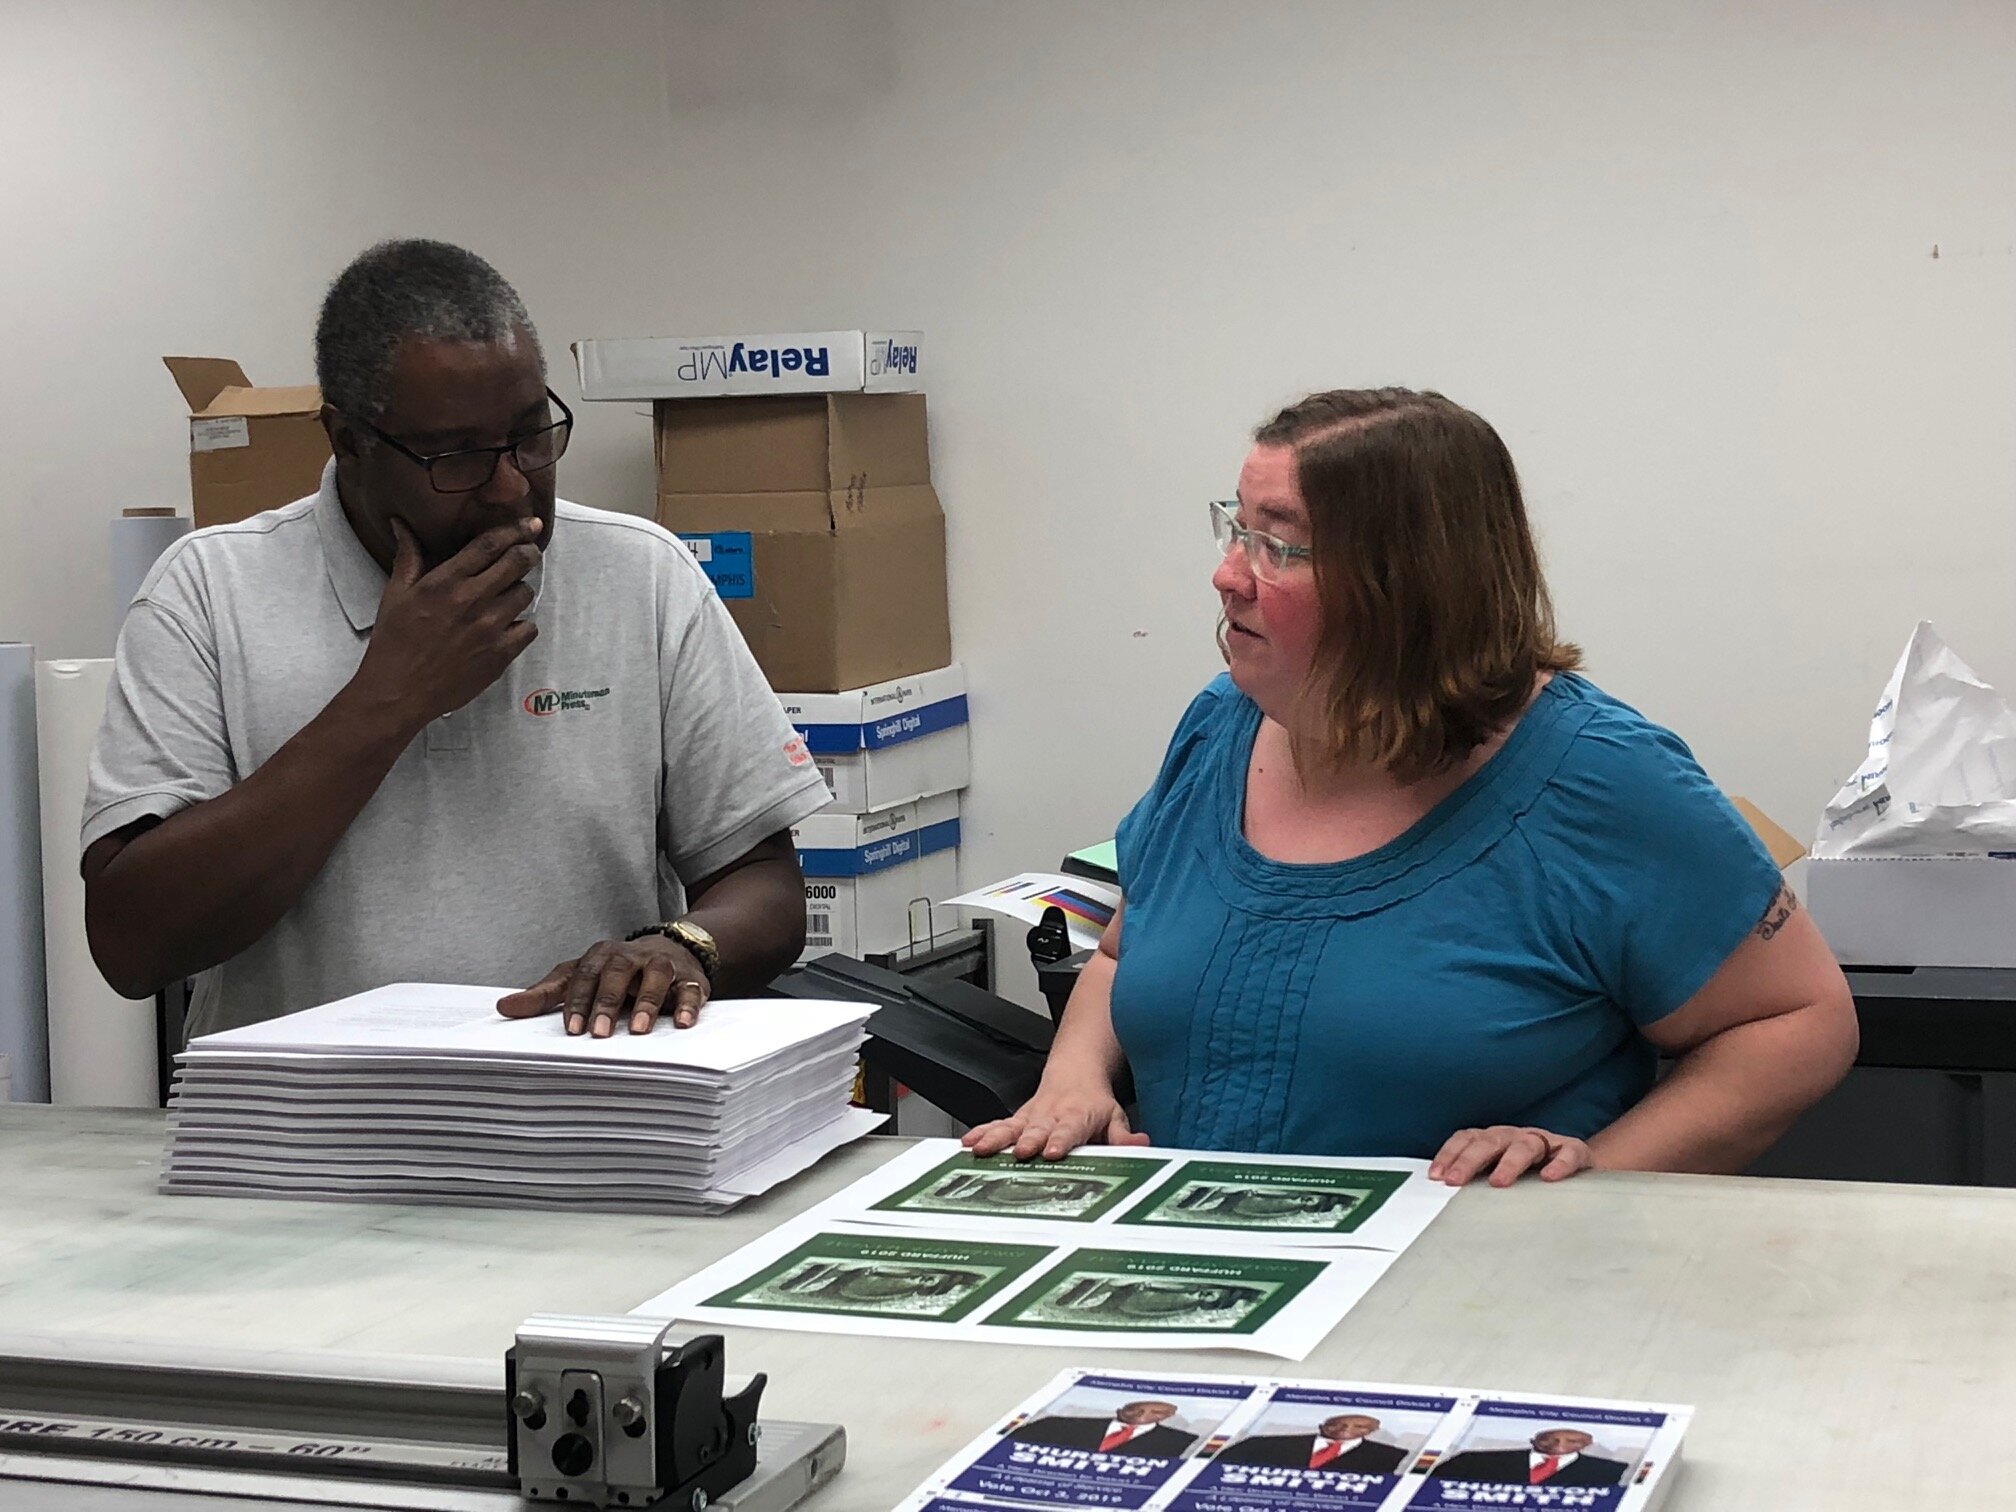 Al Harville (L) and Allison Hancock work together to finalize the design and layout on a client's order. (AJ Dugger III) 